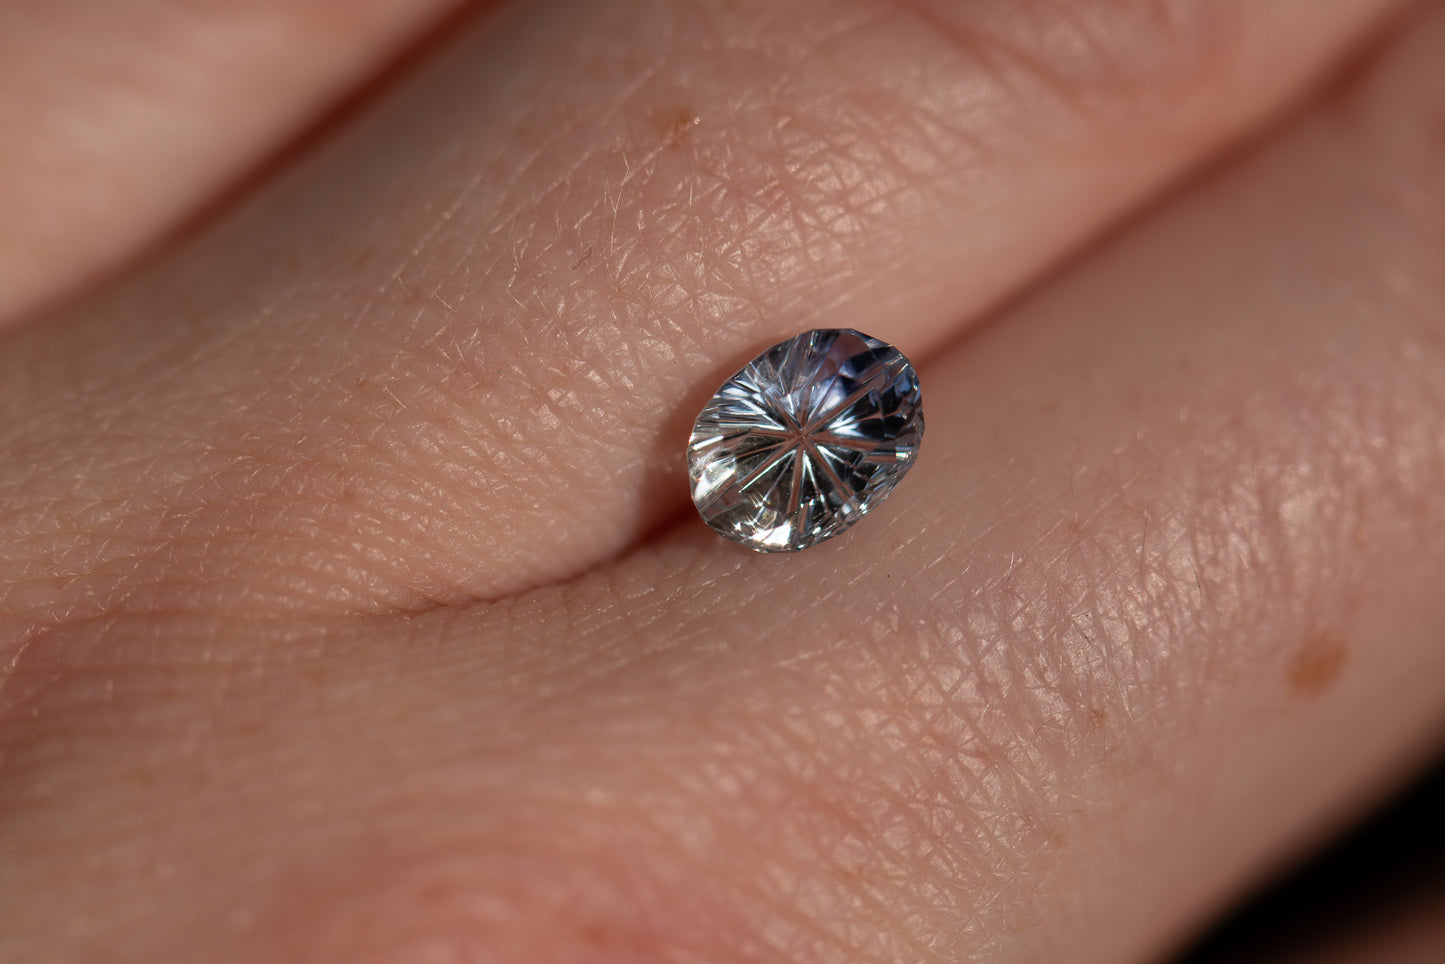 Load image into Gallery viewer, 1.89ct oval icy bicolor sapphire, Starbrite cut from John Dyer
